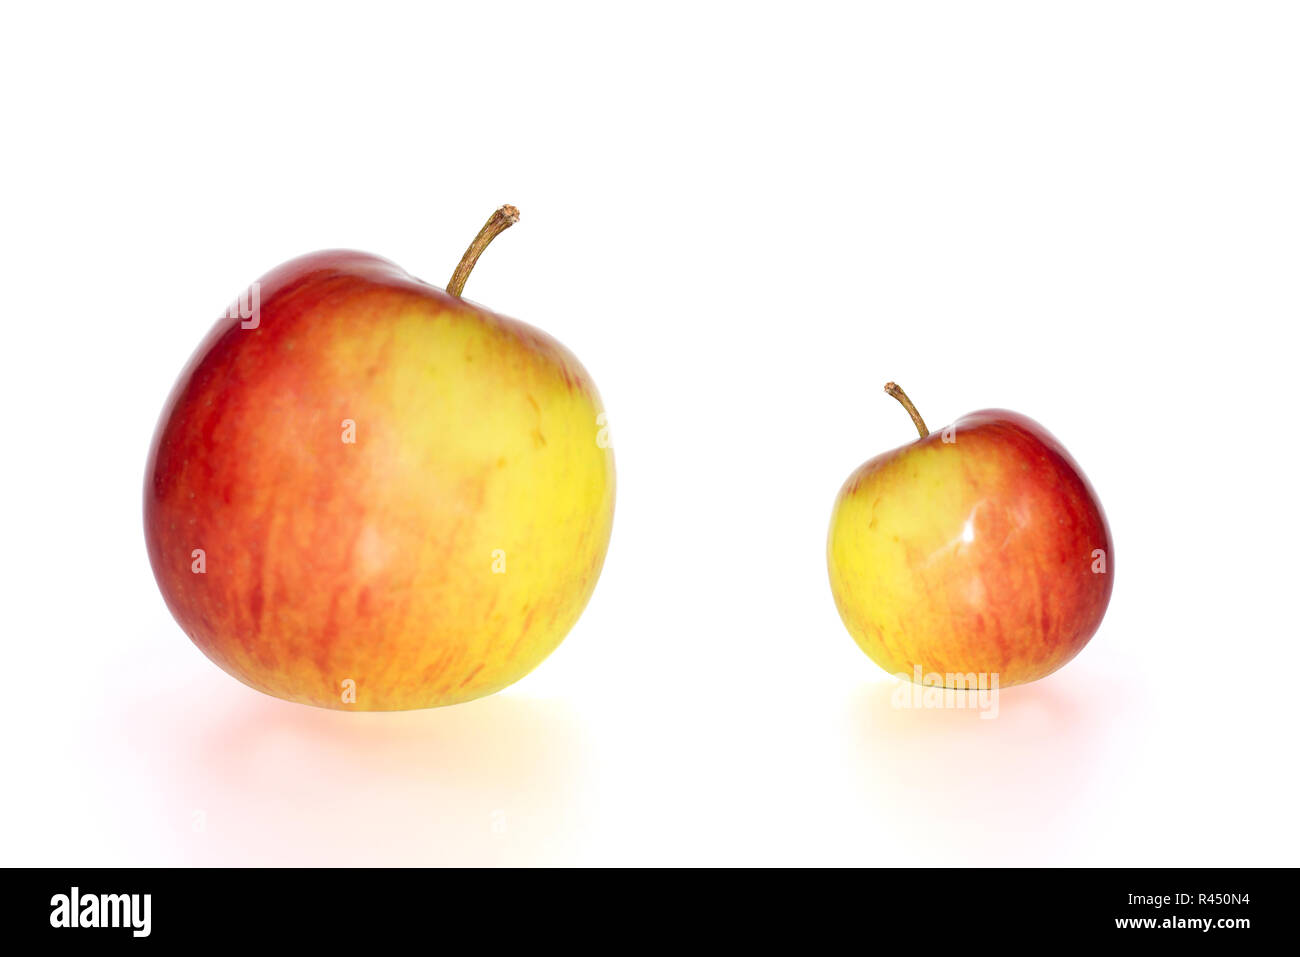 big and small juicy apples Stock Photo